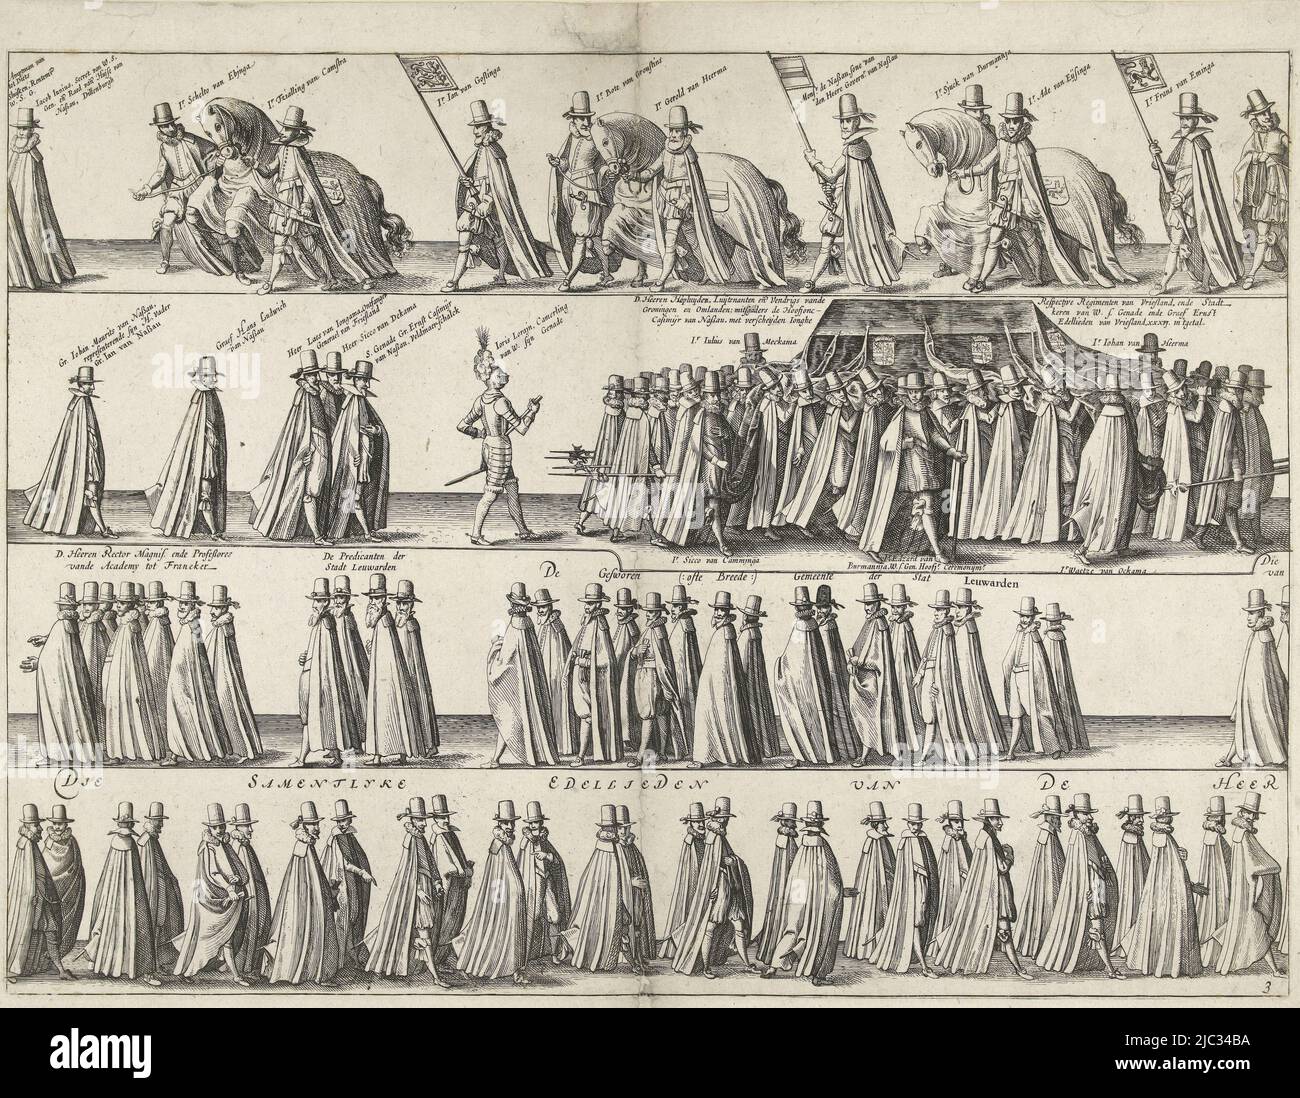 Funeral procession following the death of William Louis of Nassau-Dillenburg, stadholder of Friesland. A procession of dignitaries, in four rows one above the other. Halfway up, the bier of the stadholder is carried. Plate number three of a total of four plates, Funeral of Willem Louis., print maker: Pieter Feddes van Harlingen, Pieter Feddes van Harlingen, publisher: Claes Jansz. Visscher (II), print maker: Friesland, Friesland, publisher: Amsterdam, Netherlands, 1620, paper, etching, h 392 mm × w 533 mm Stock Photo